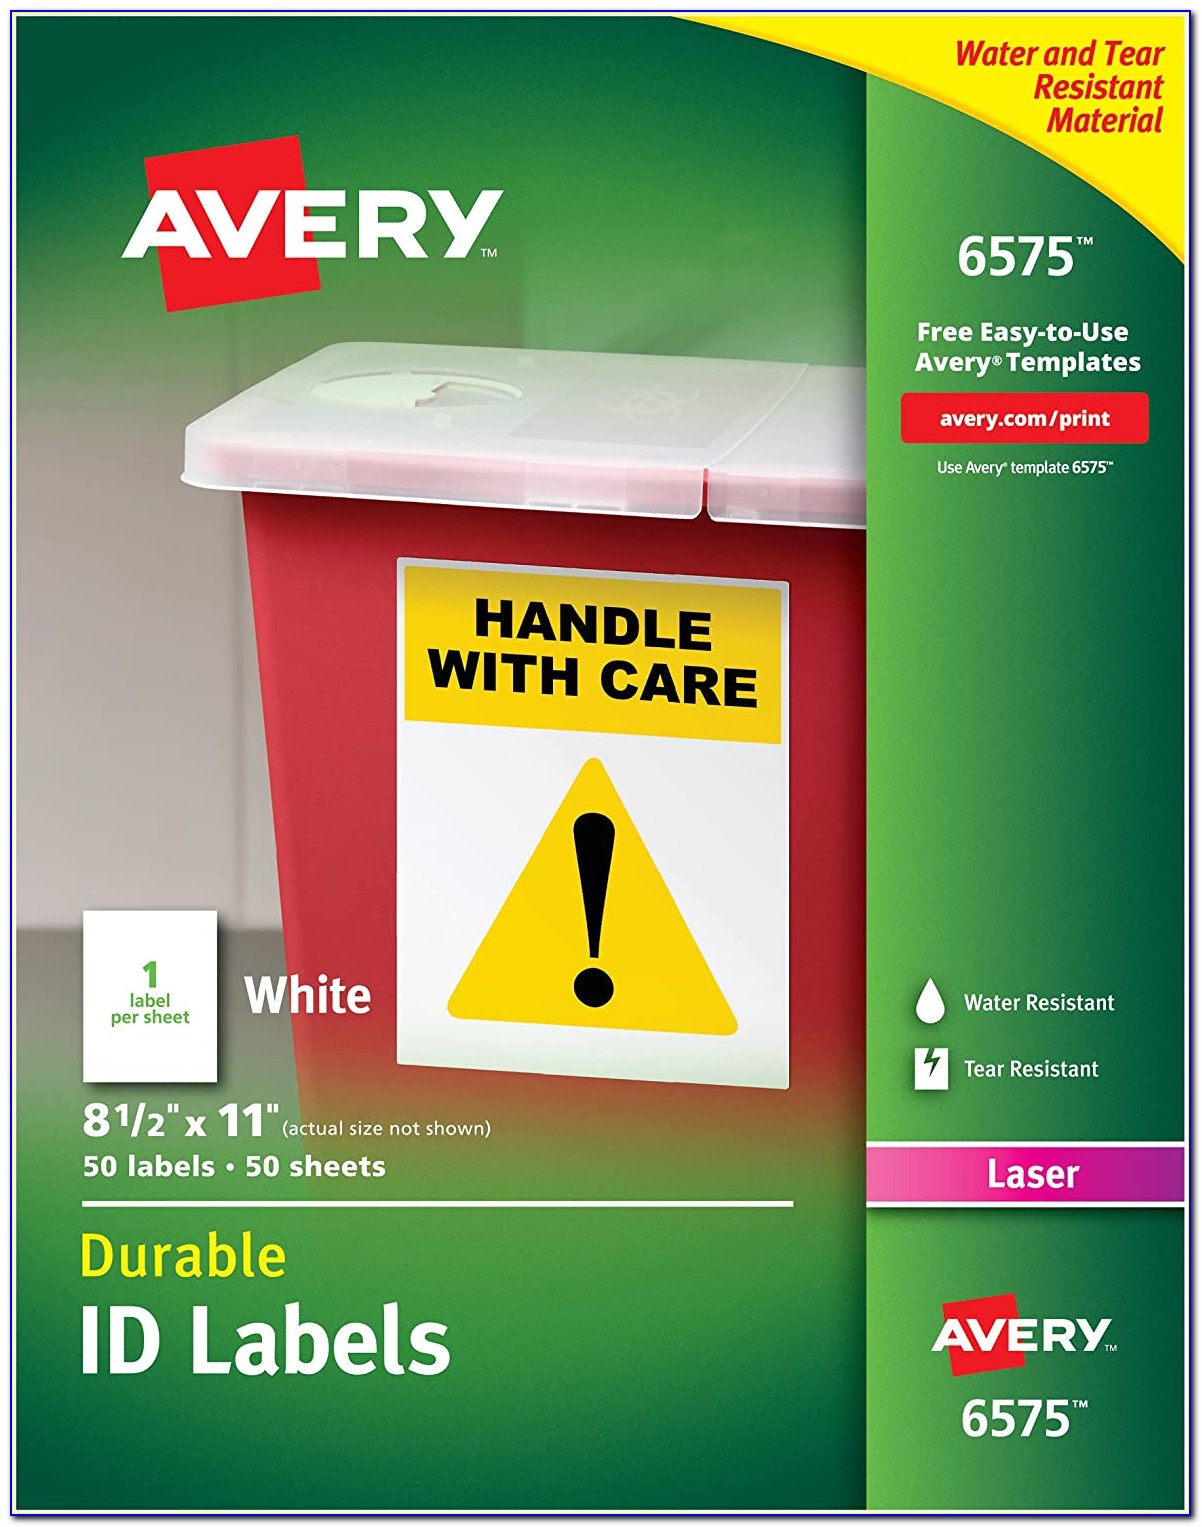 Download Avery Labels Template 8460